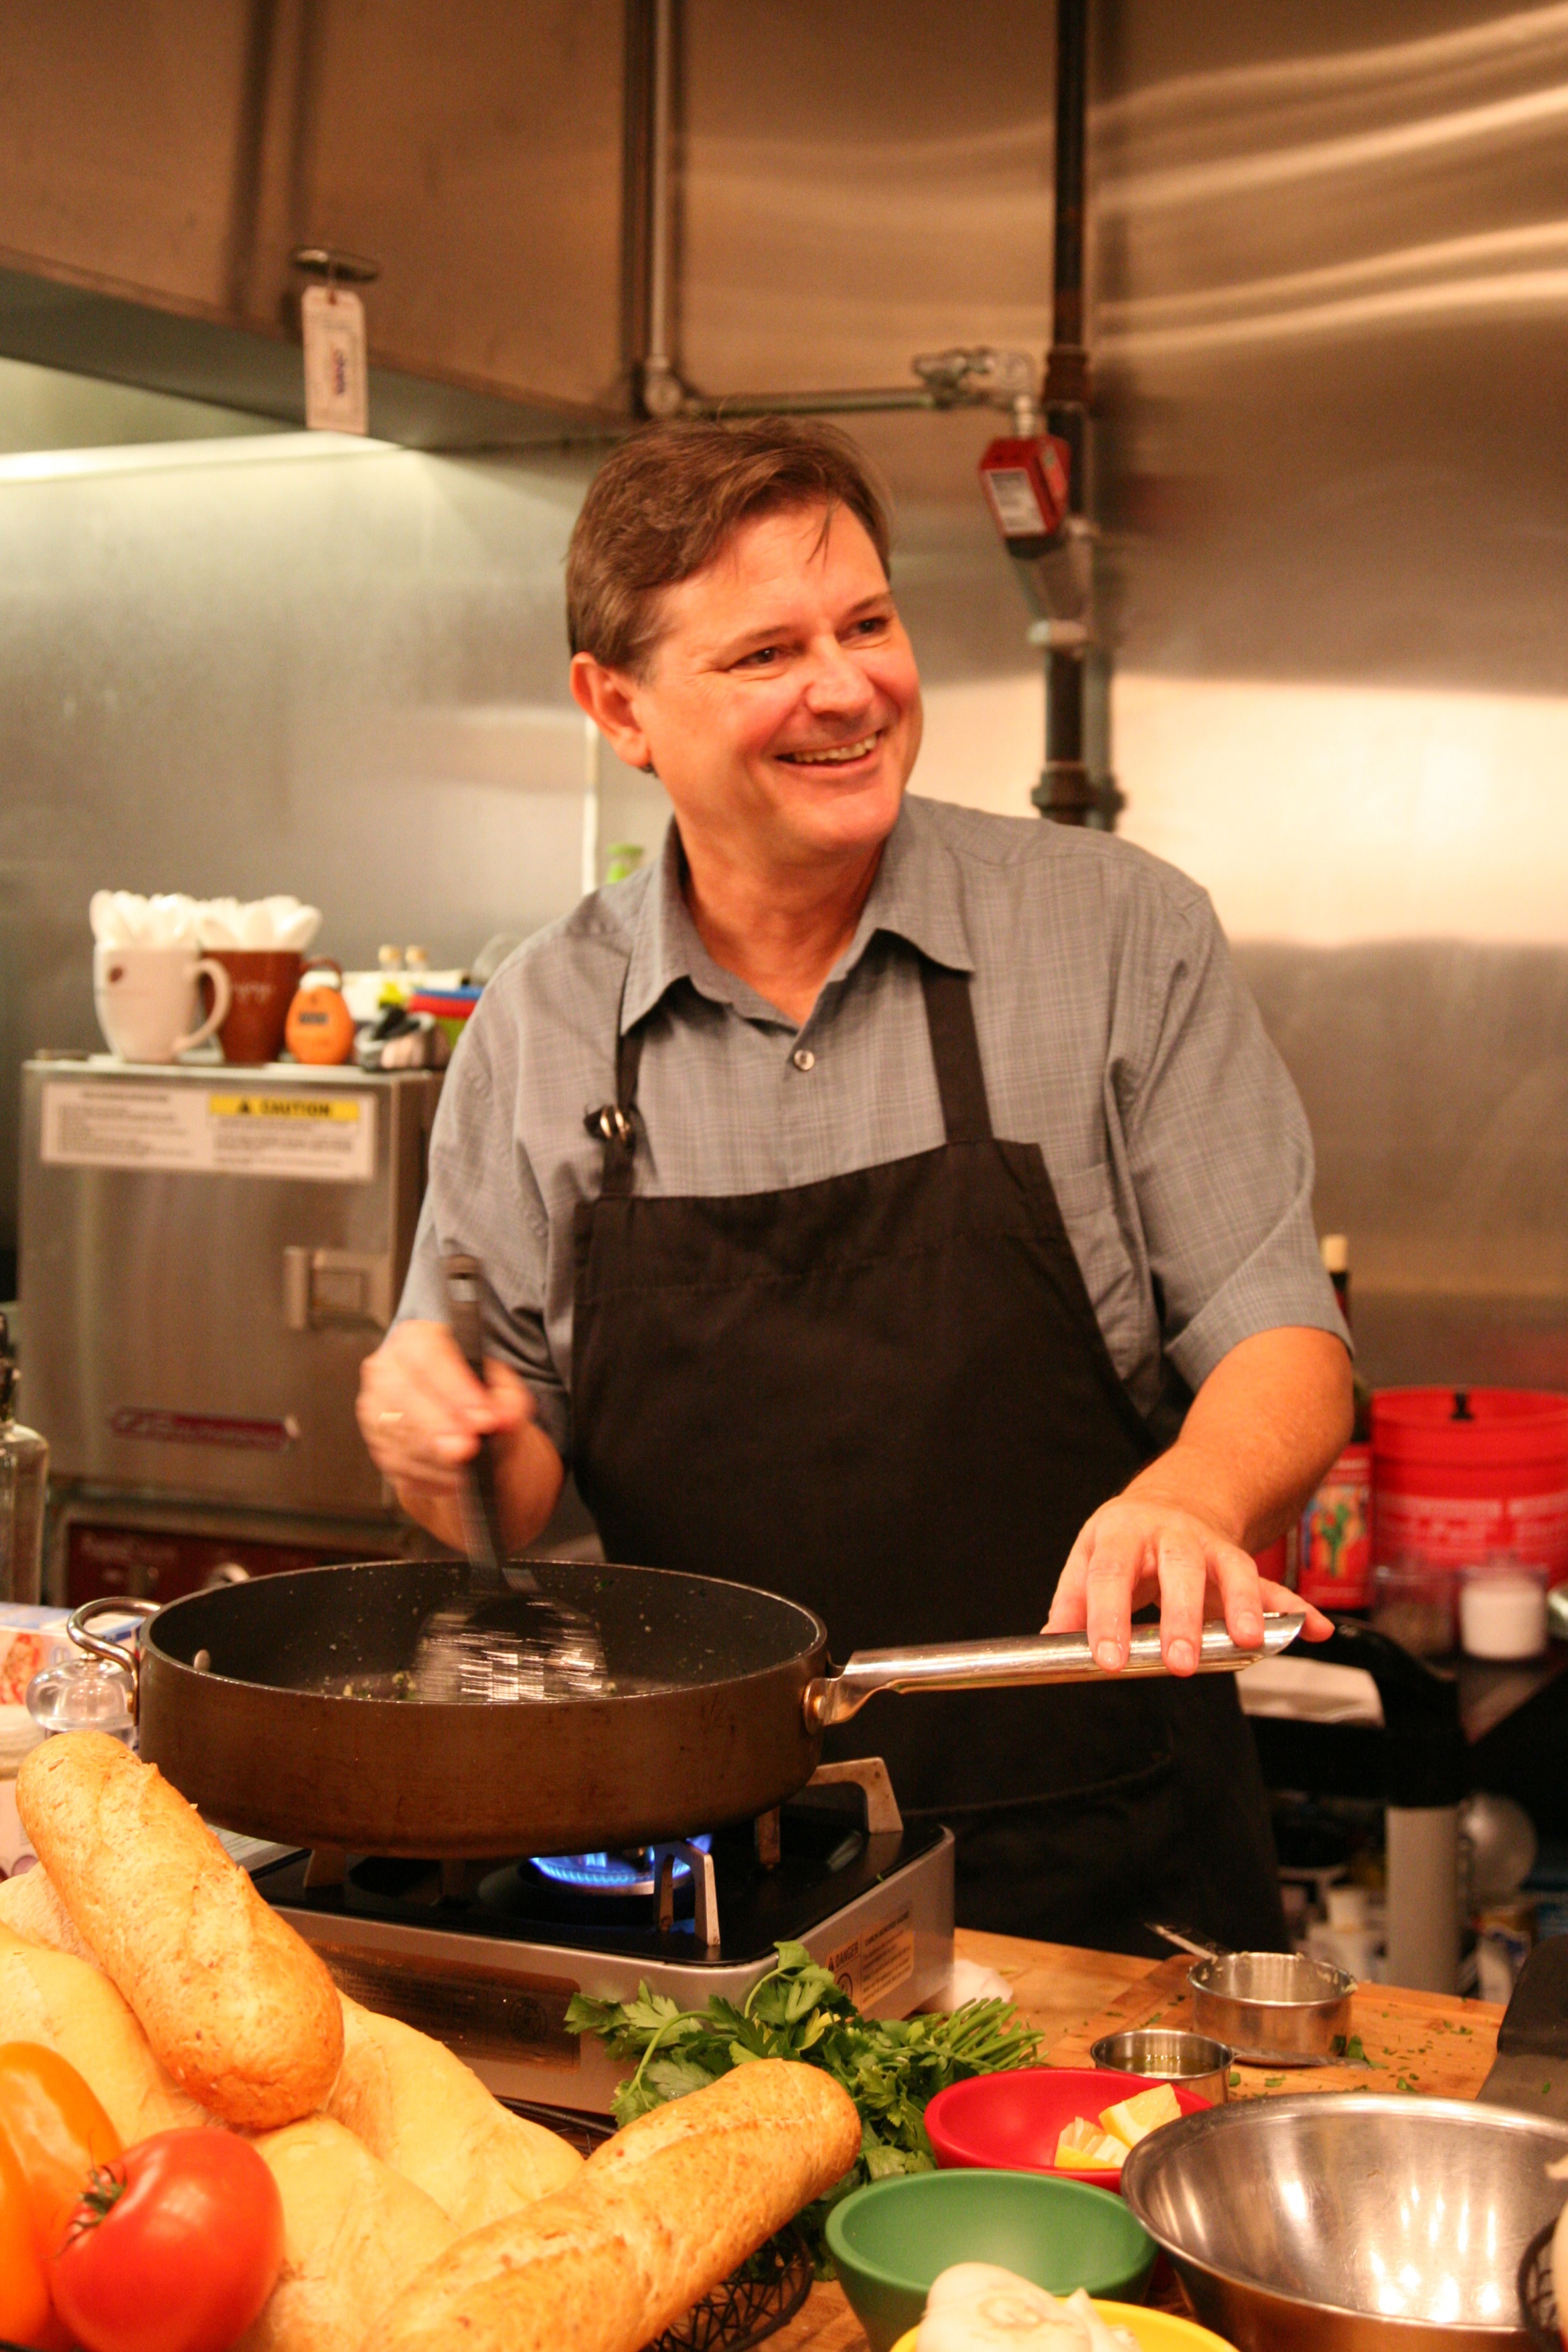 Chef Warren cooking and smiling